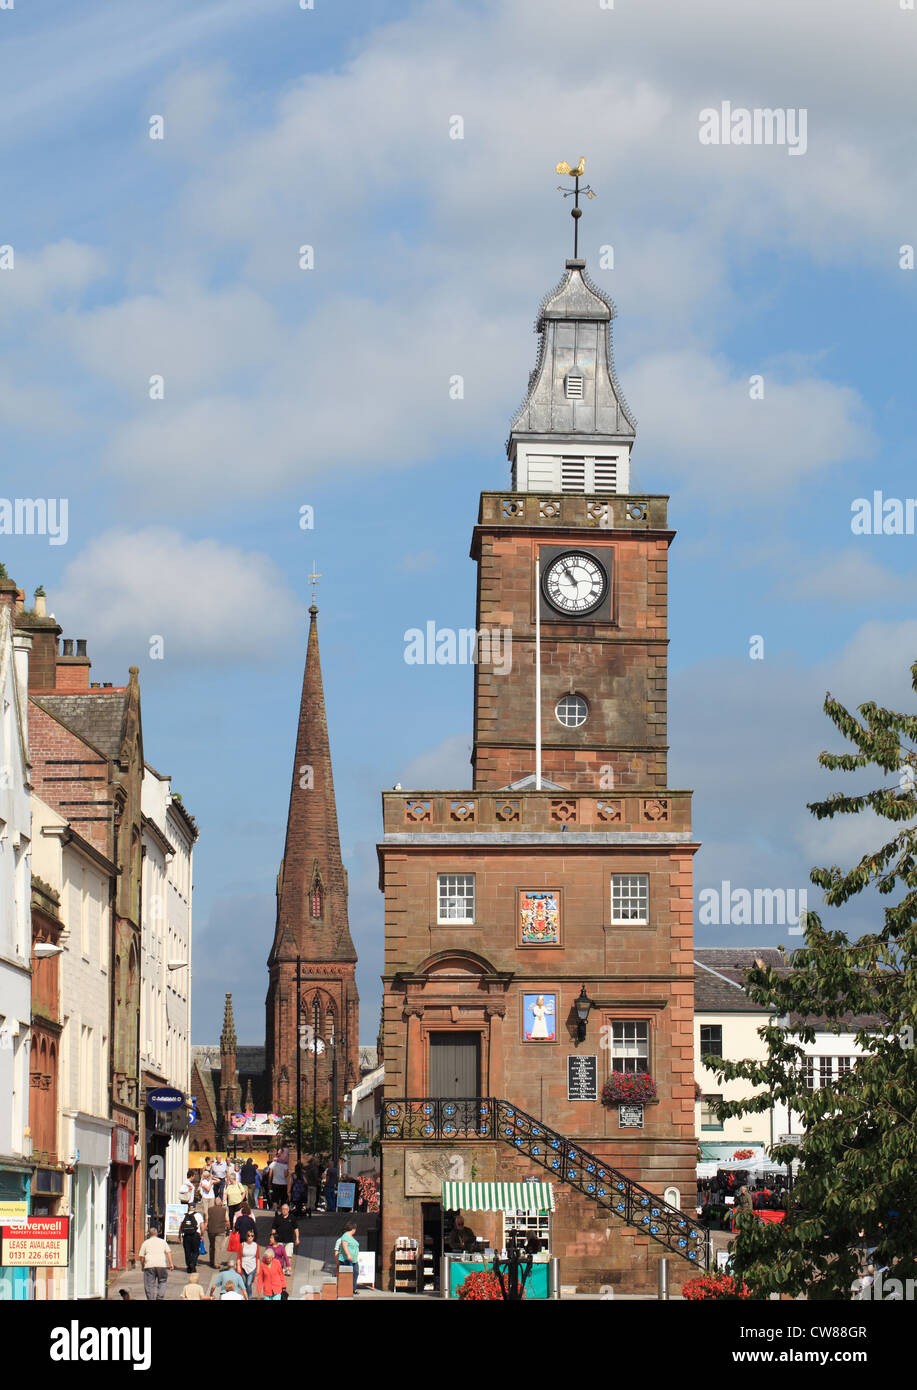 The High Street, Dumfries showing the Midsteeple and Greyfriars church, south east Scotland, UK Stock Photo